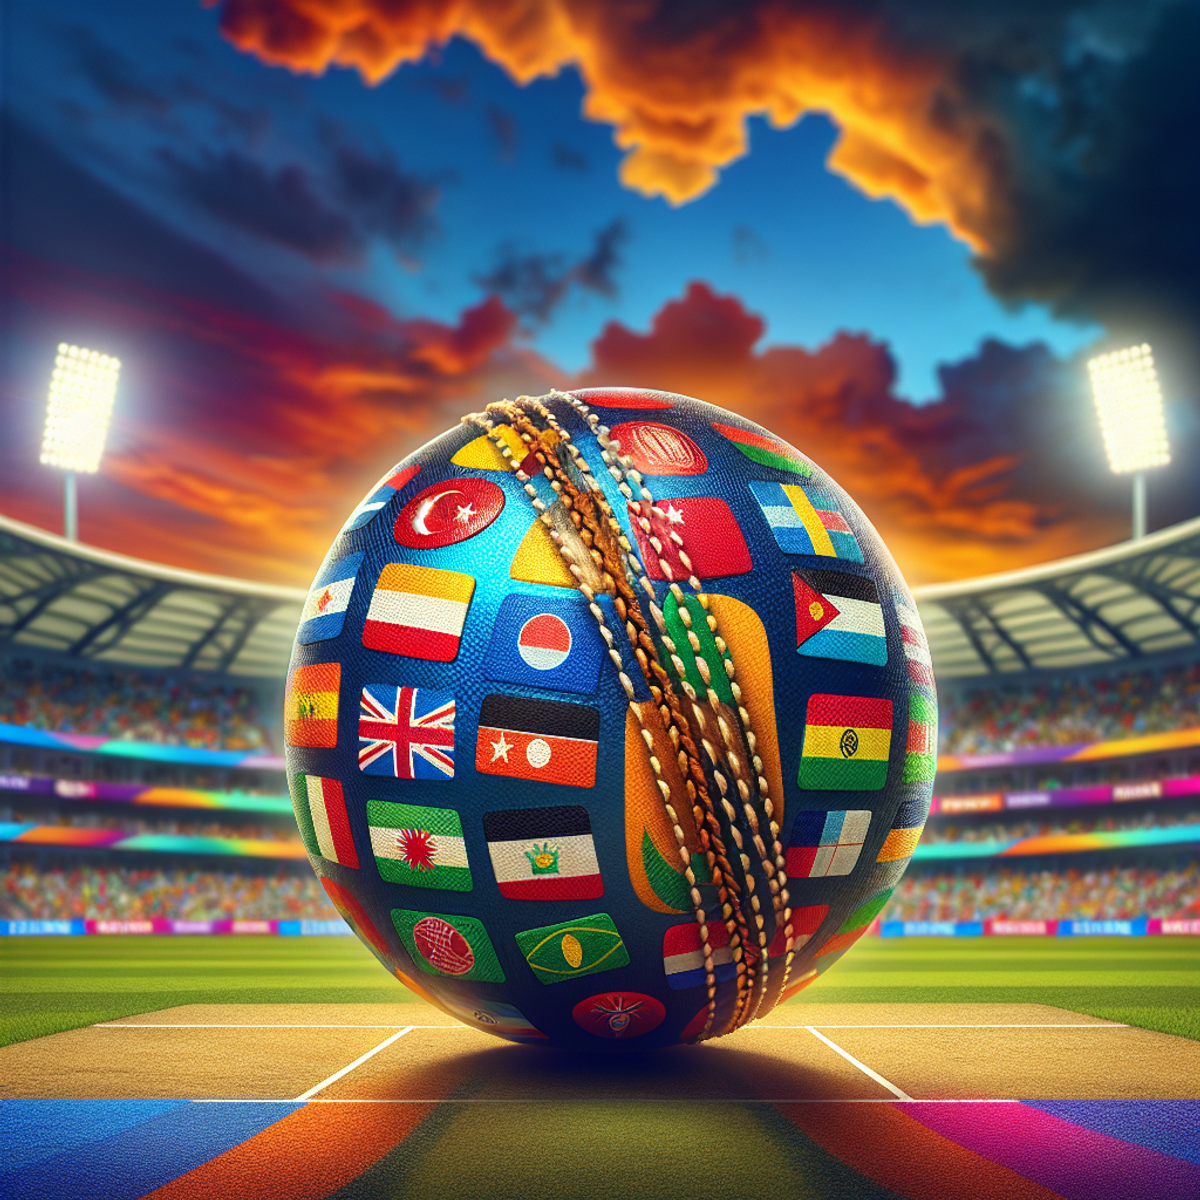 A cricket ball with flags and colors of different countries for the ICC Men’s T20 World Cup